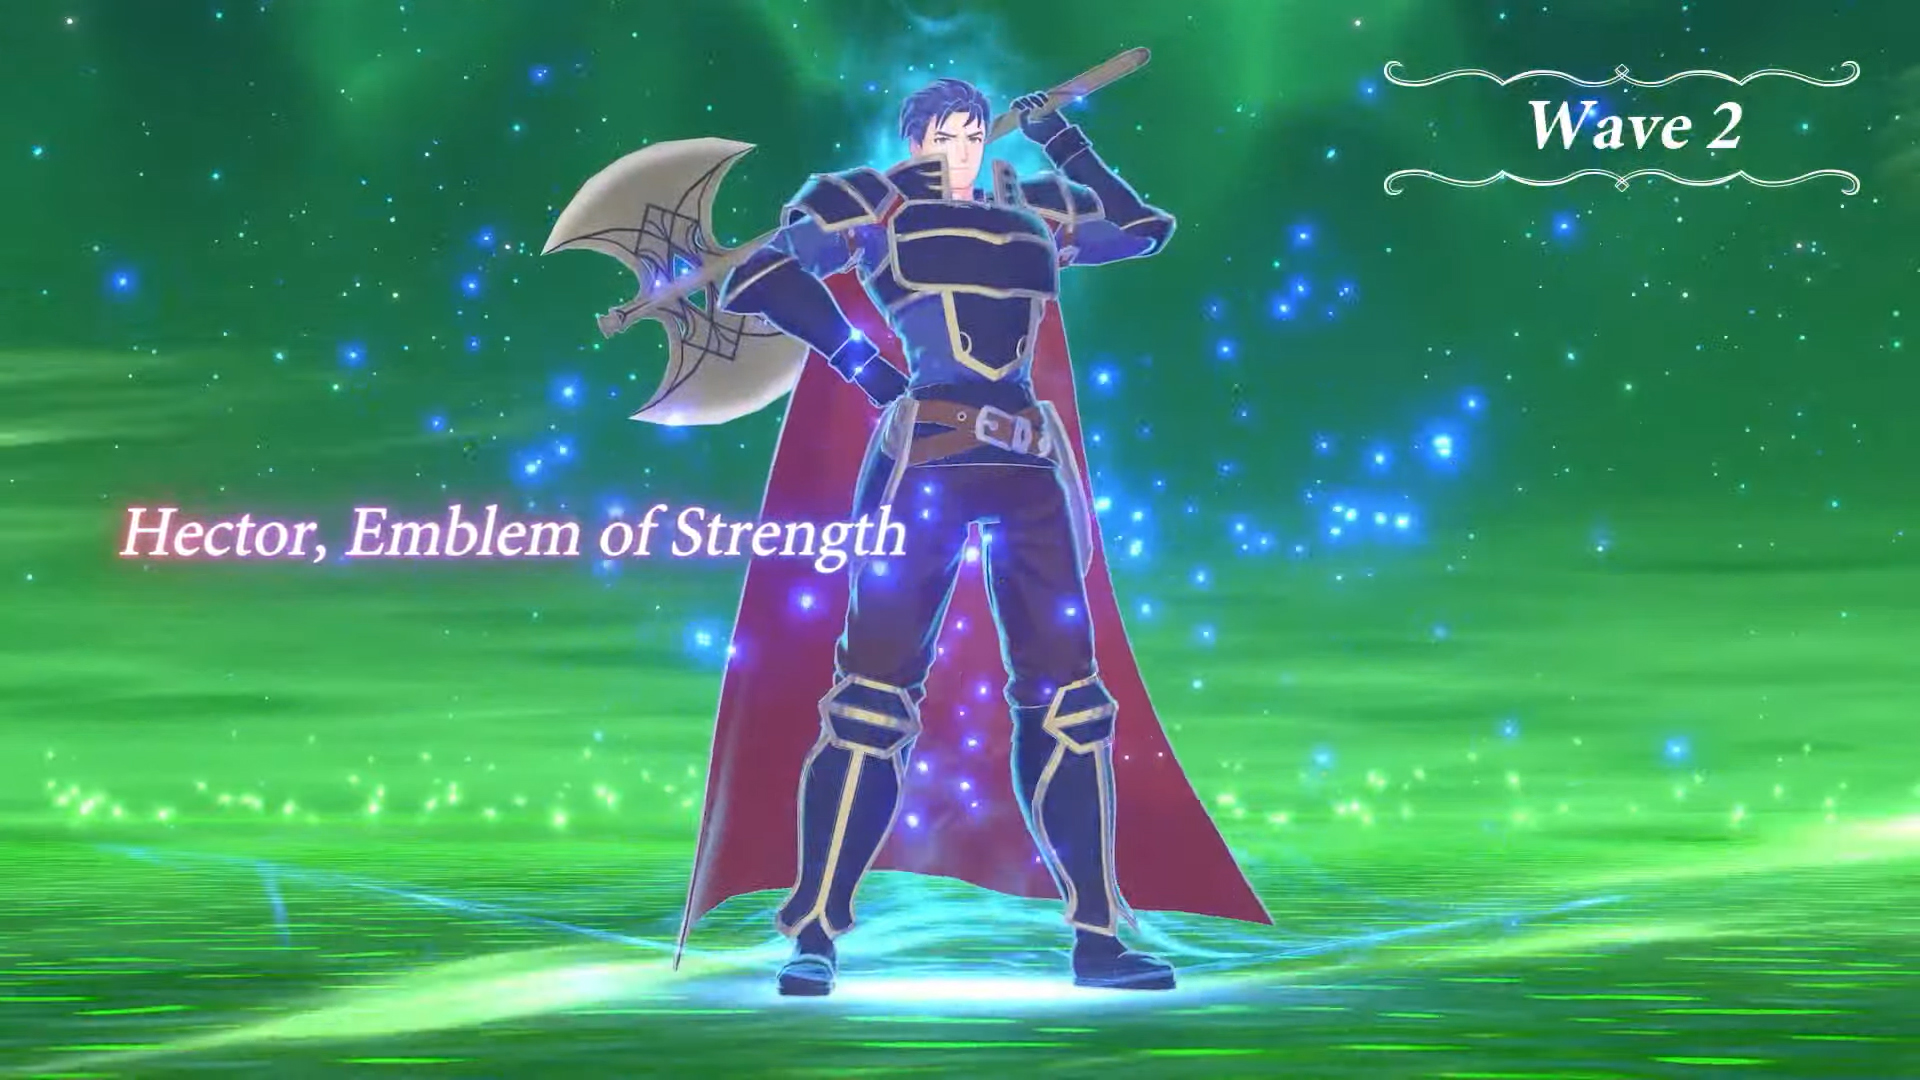 Fire Emblem Engage: Expansion Pass 3 4 Serenes Packs in Forest Direct Nintendo & - 2, Shown